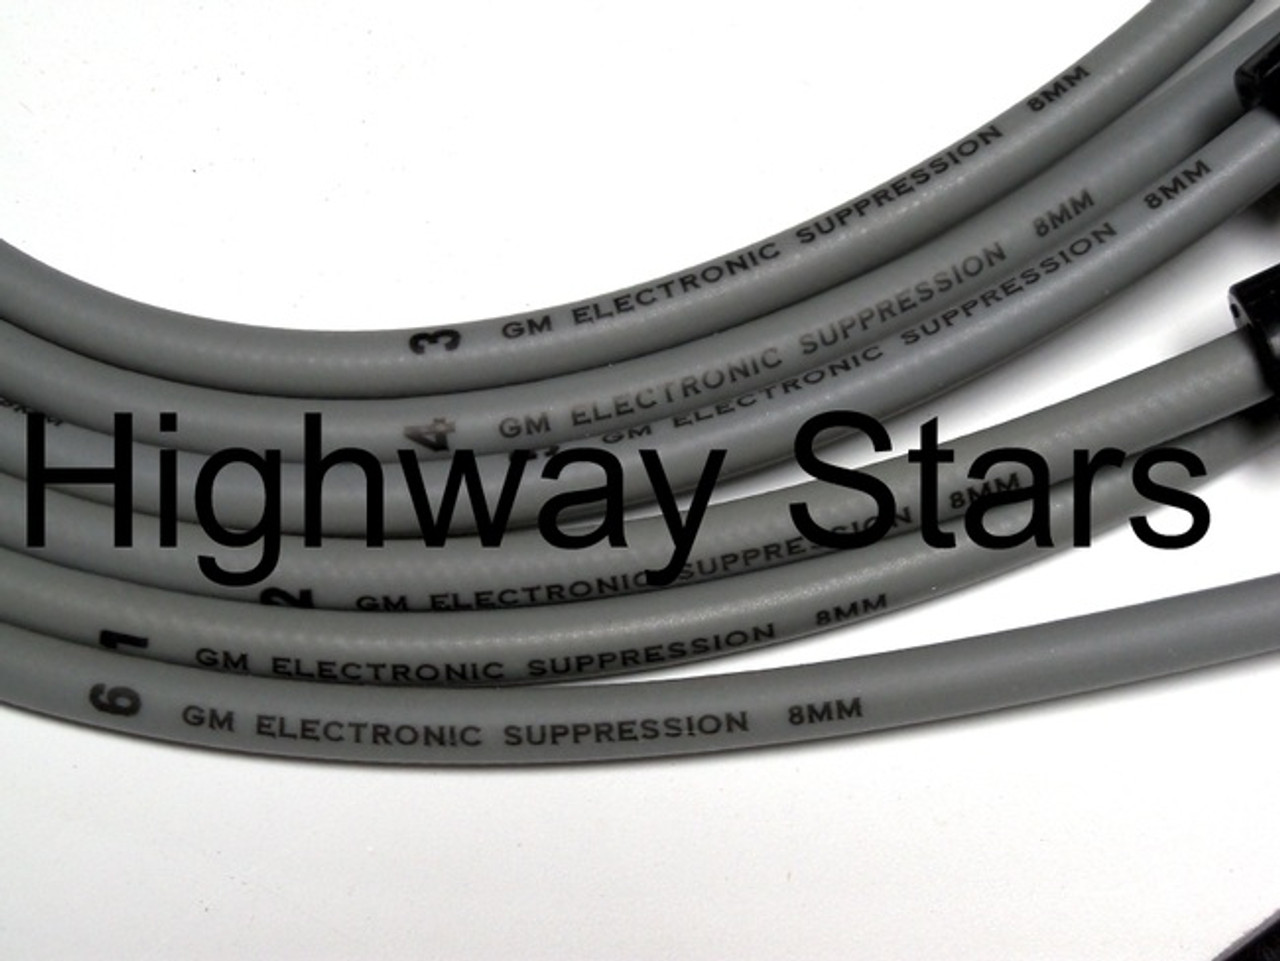 Highway Stars Licensed GM Restoration Spark Plug wires for Buick Regal Grand National 1984-1987 replaces GM 12073924